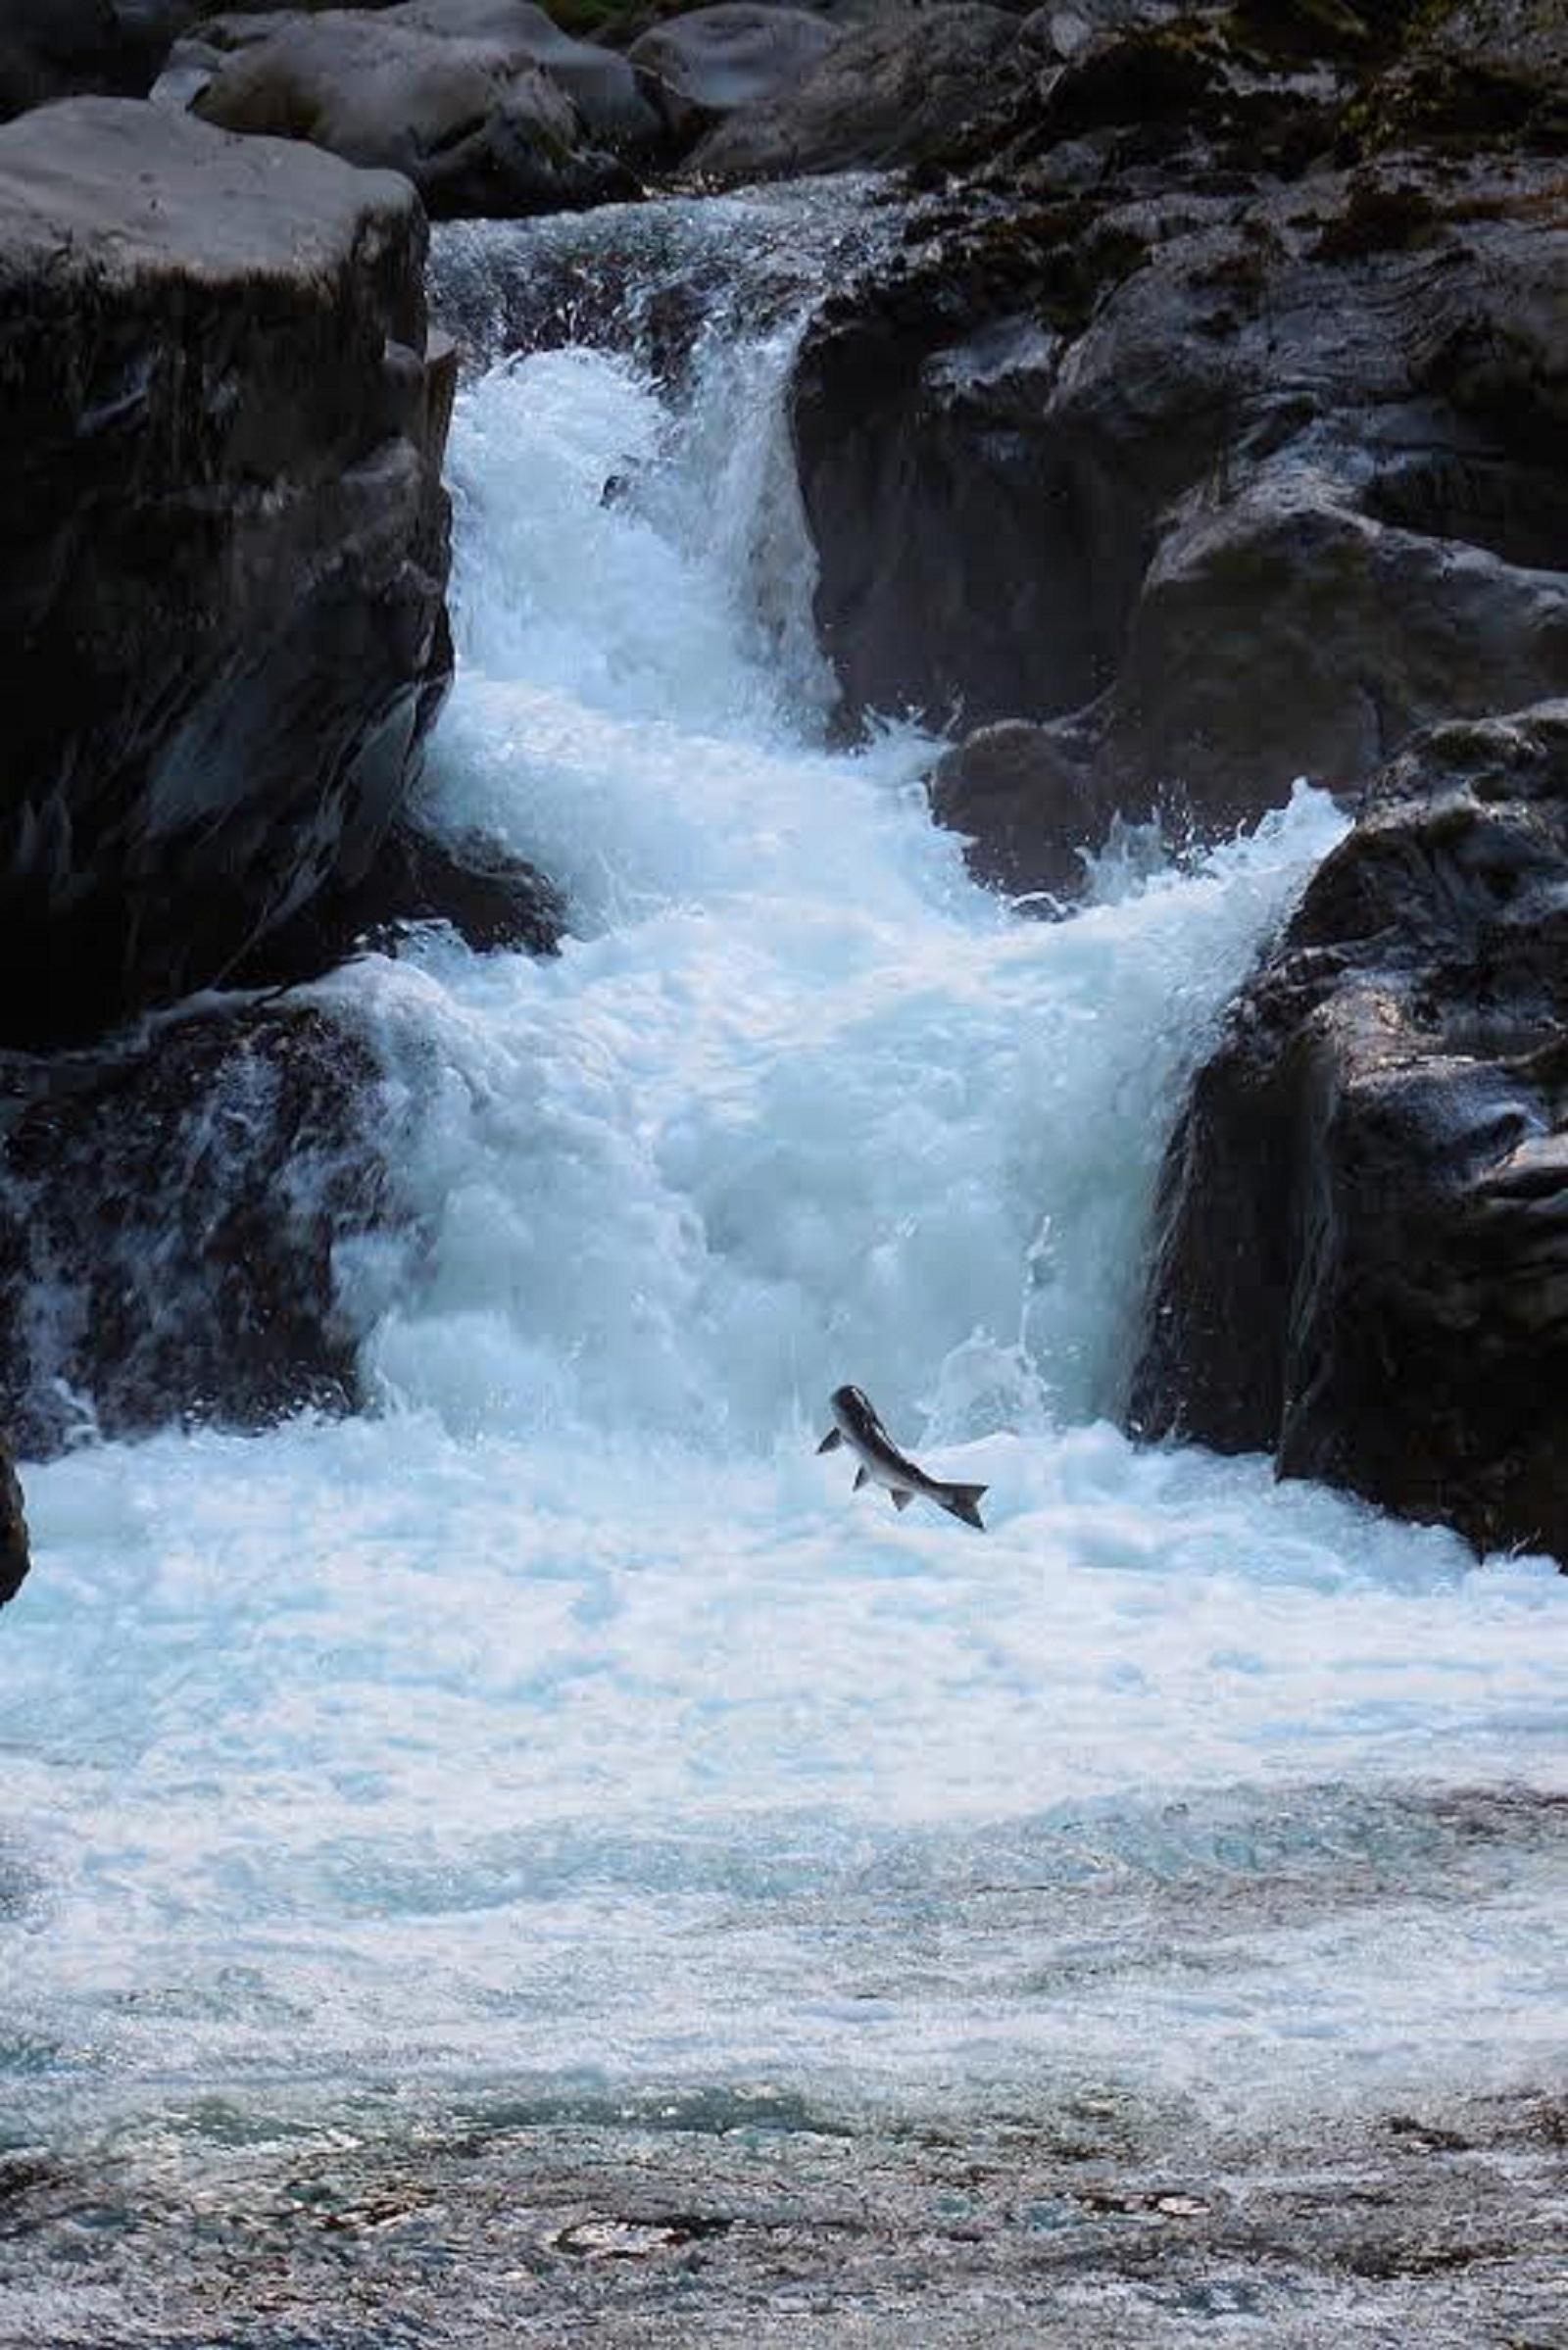 A salmon jumping up a waterfall.